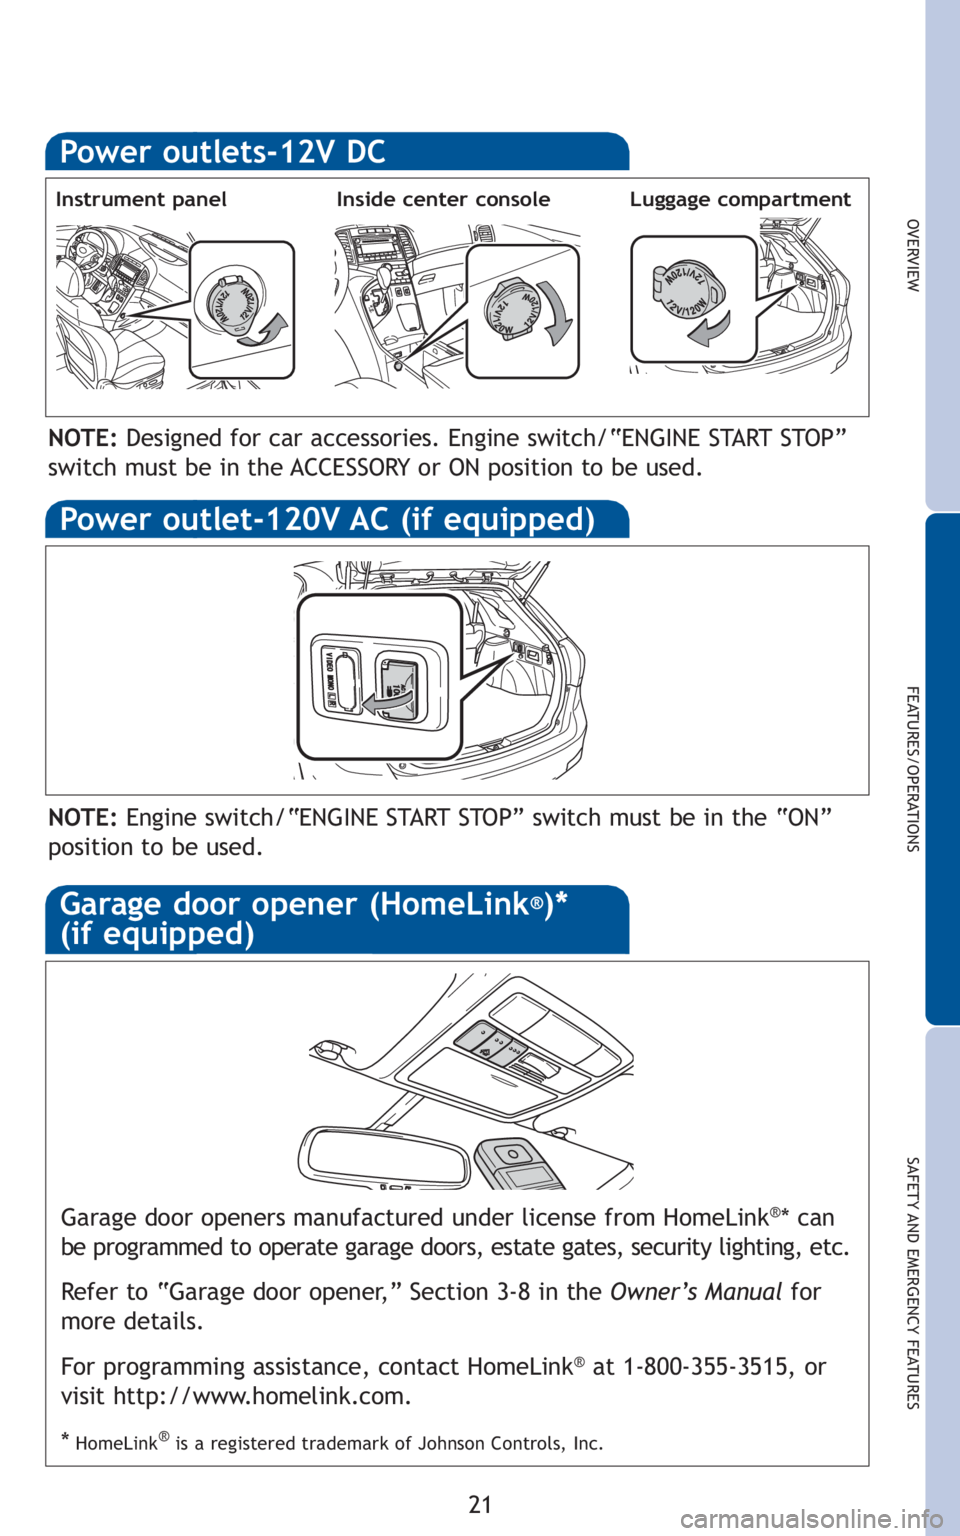 TOYOTA VENZA 2010  Owners Manual (in English) 21
OVERVIEW
FEATURES/OPERATIONS
SAFETY AND EMERGENCY FEATURES
Power outlets-12V DC
Garage door openers manufactured under license from HomeLink®* can
be programmed to operate garage doors, estate gat